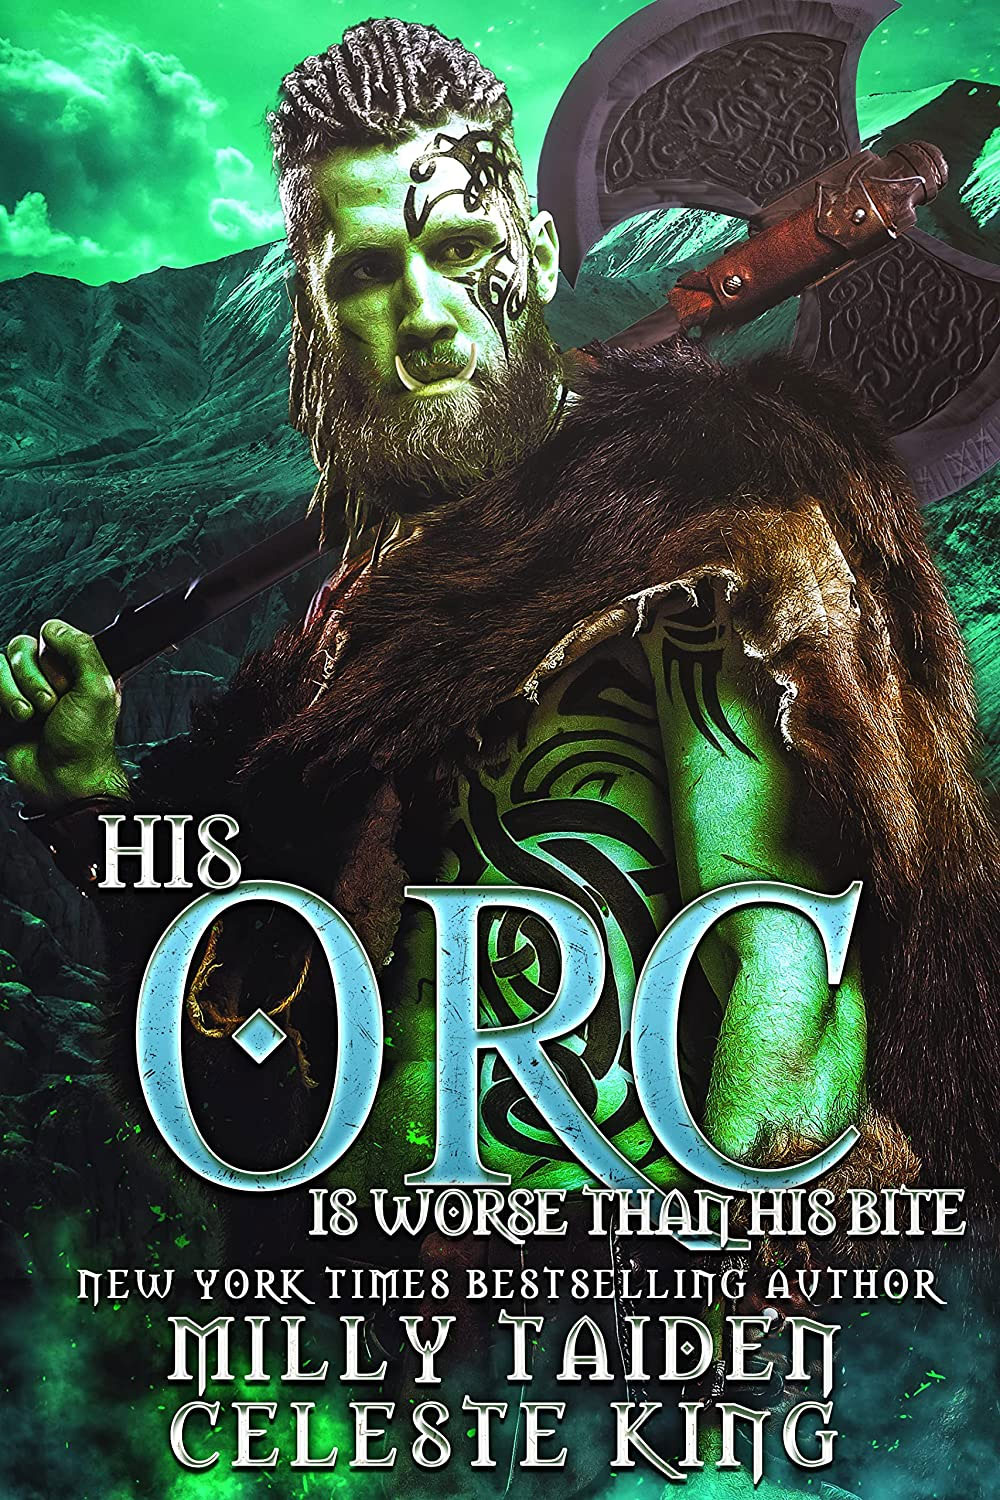 His Orc is Worse than His Bite